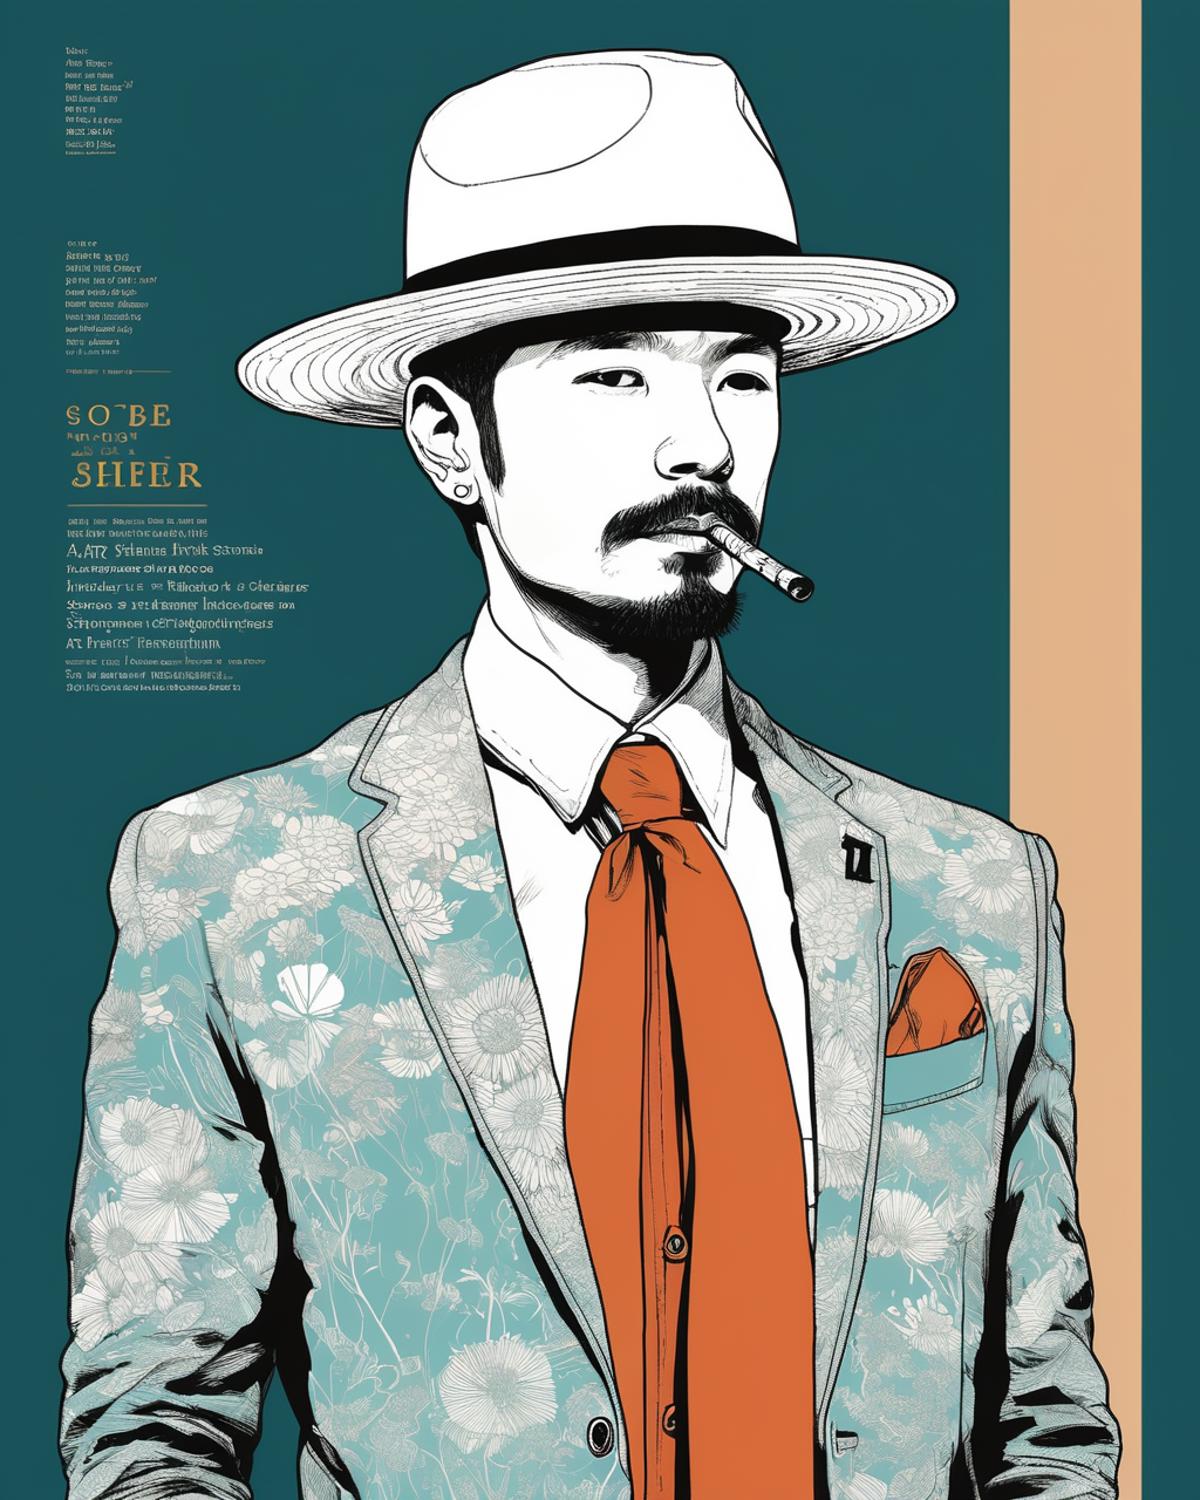 A man wearing a hat, suit, and tie smoking a cigar on a poster.